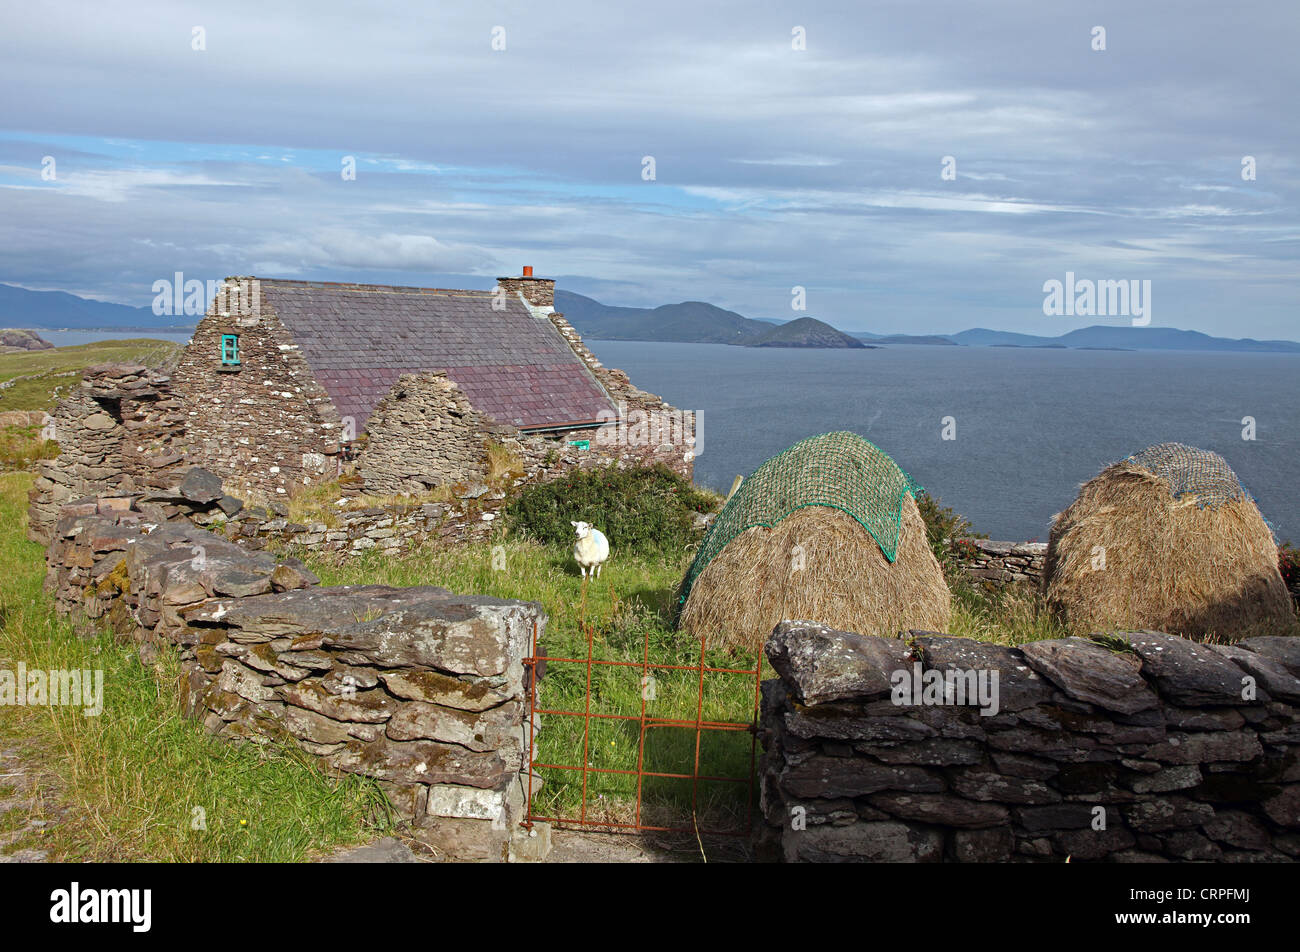 A restored cottage in Cill Rialaig, an 18th century deserted village destined for demolition until rescued by arts patron Noelle Stock Photo